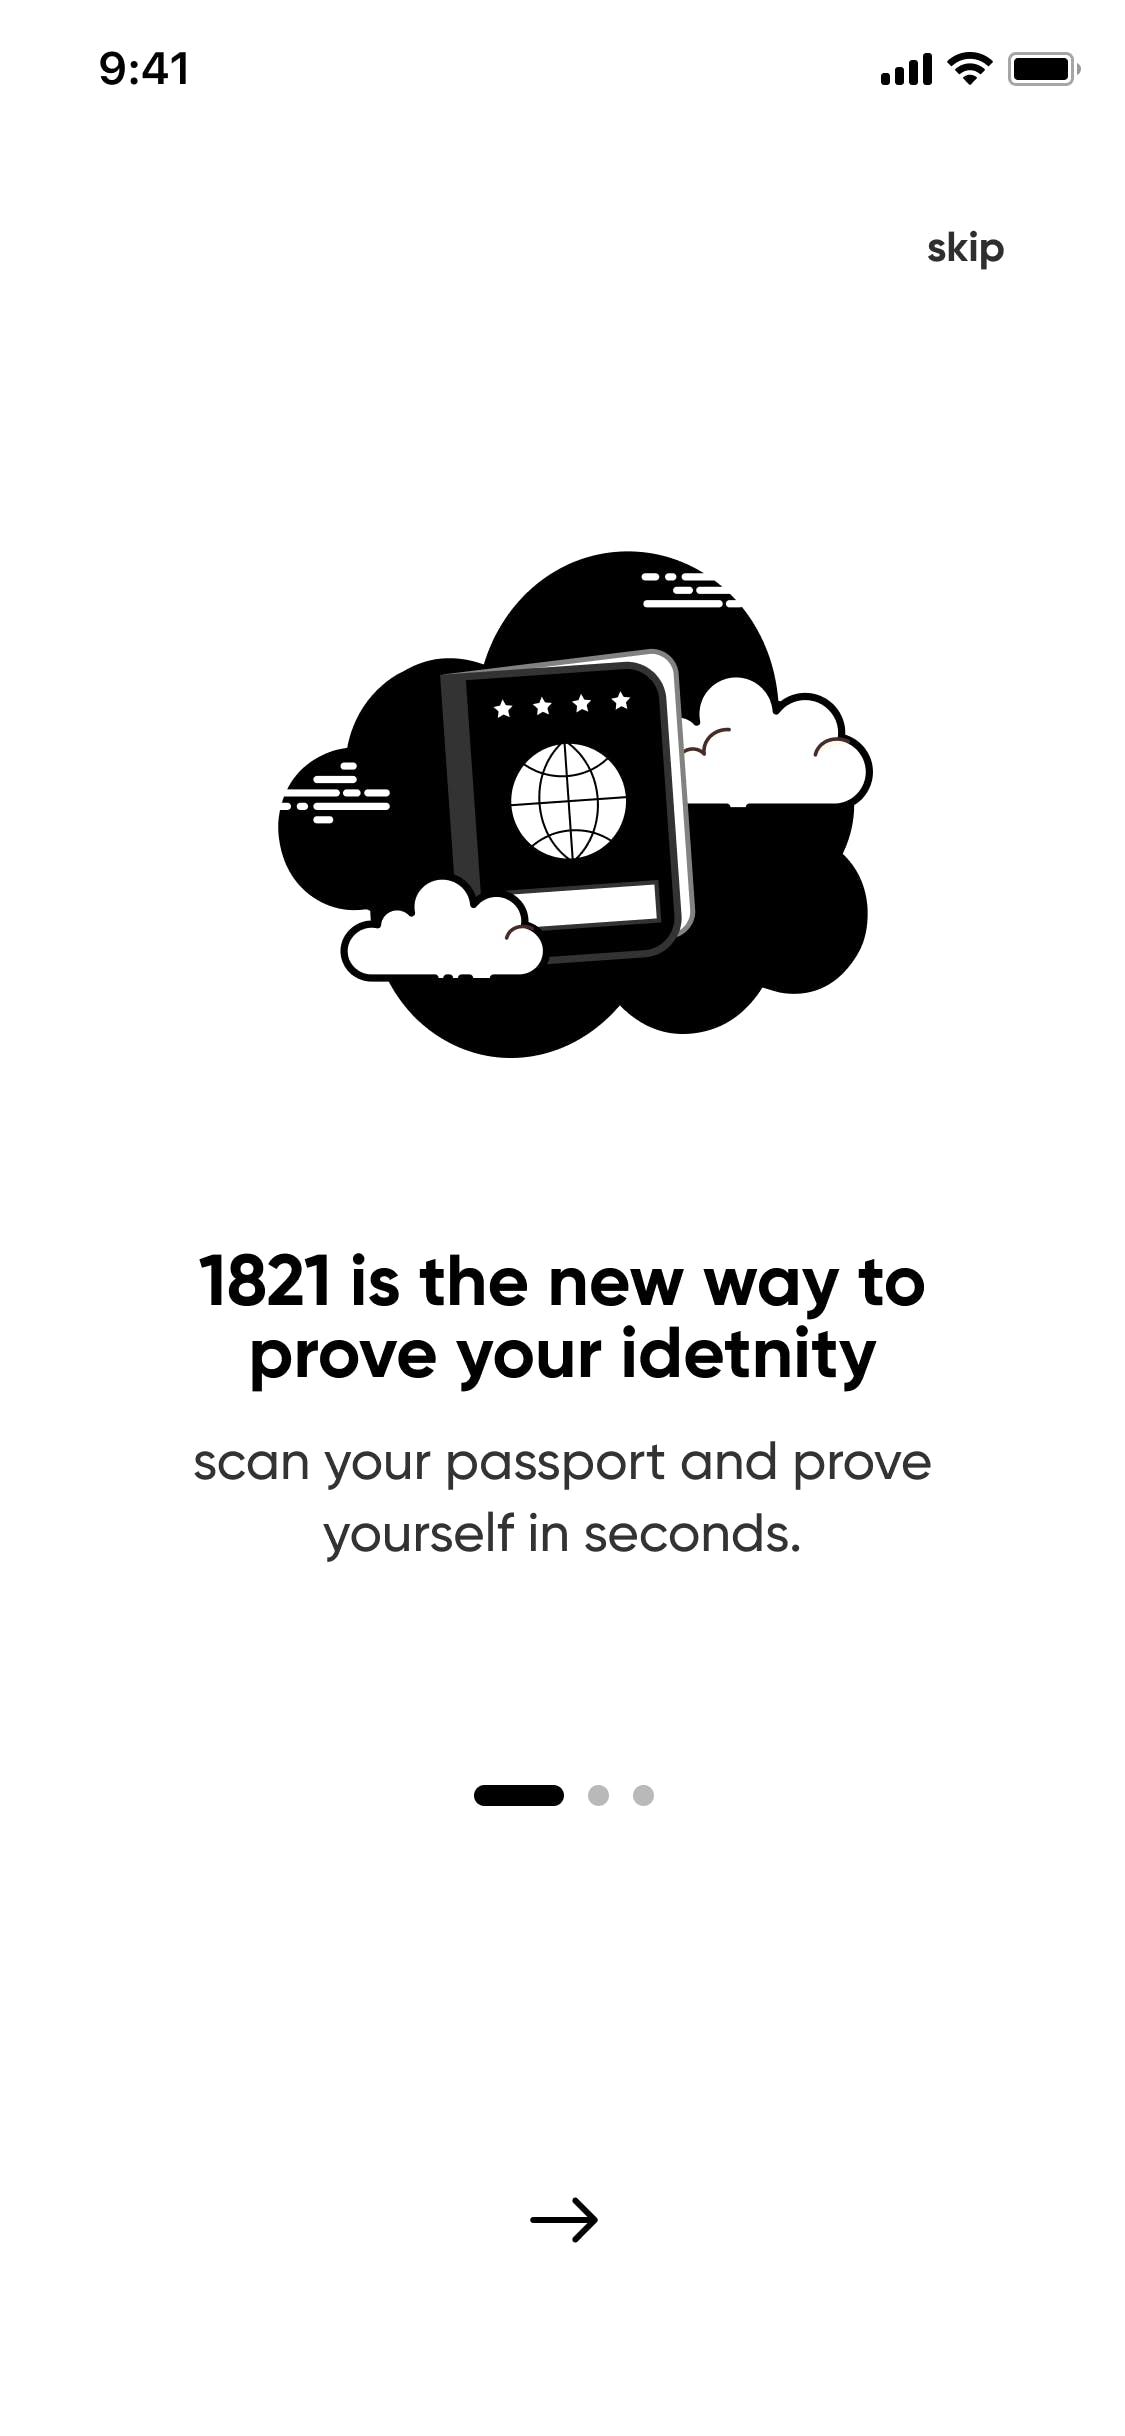 1821 app - prove your age with Apple NFC media 2